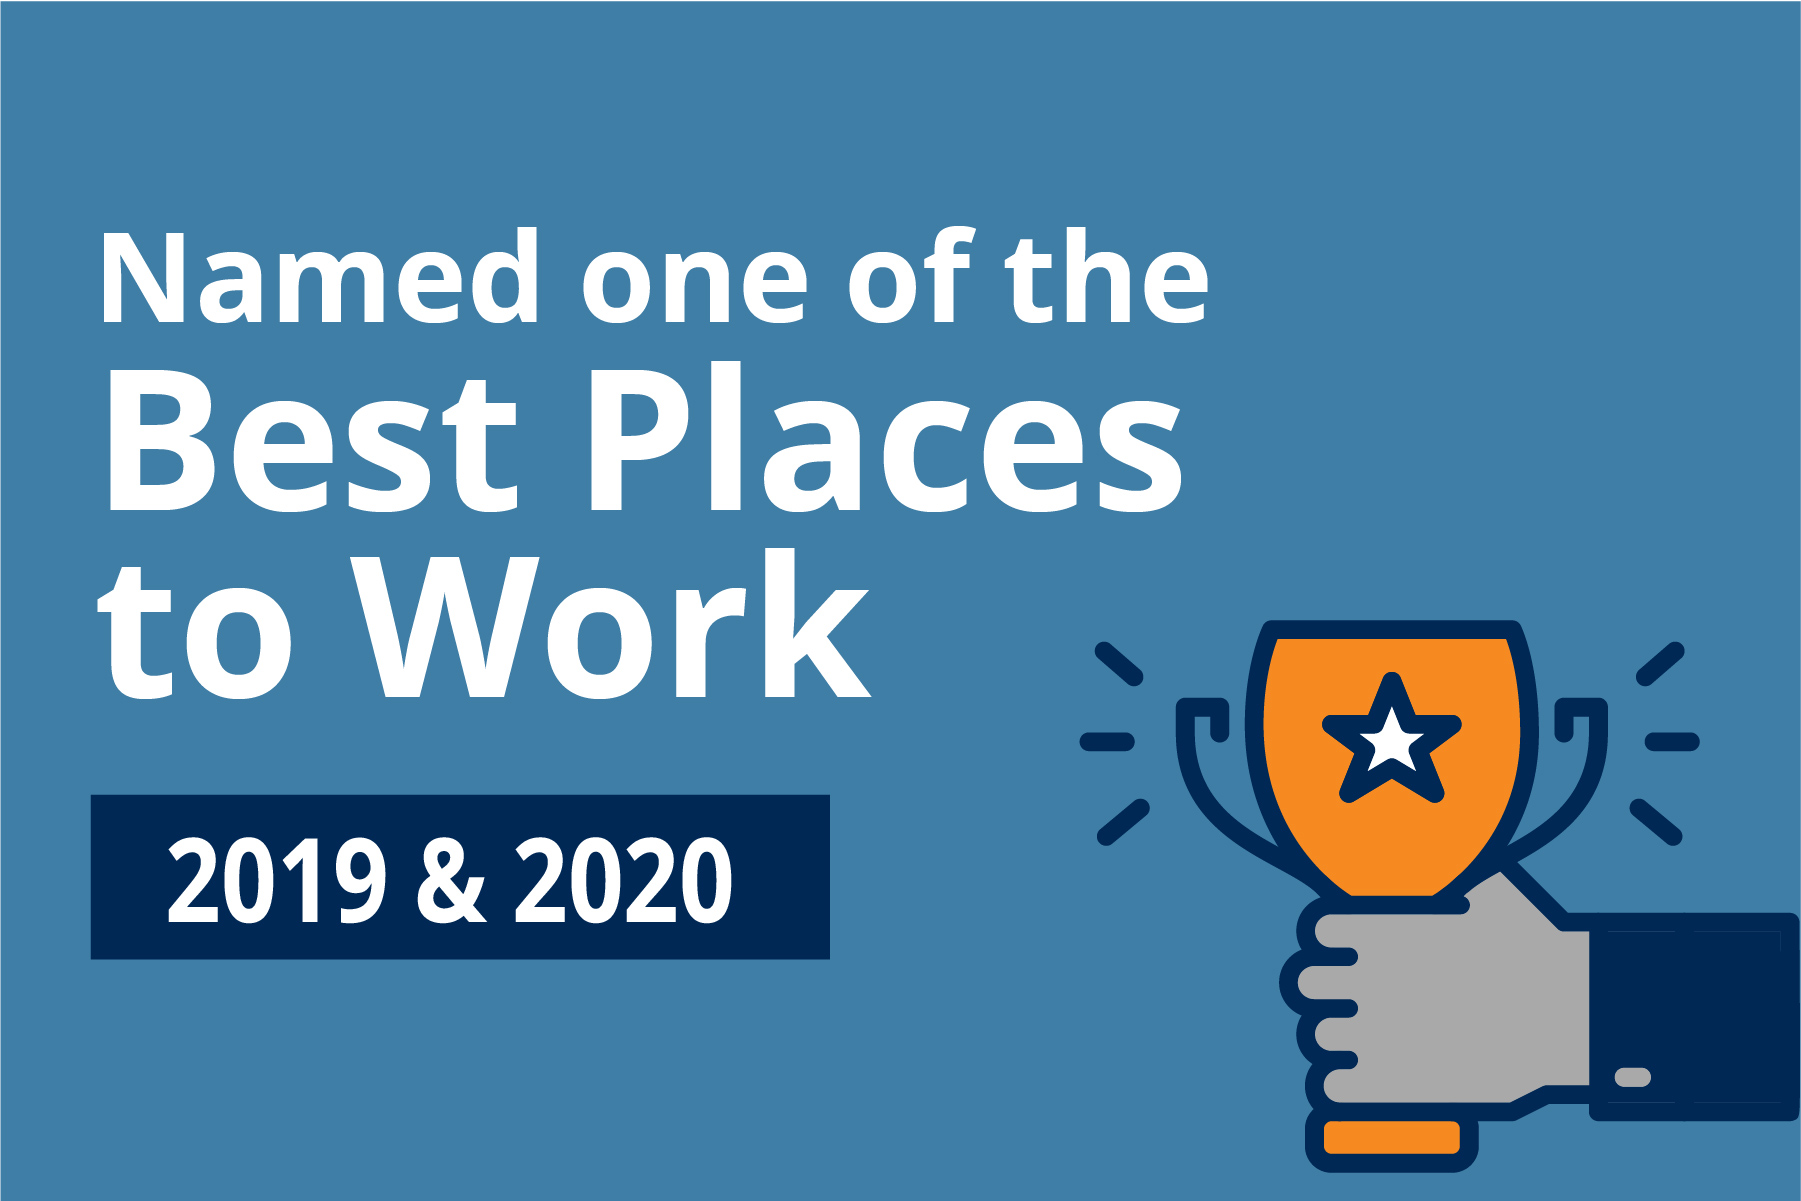 WorkSmart named one of the best places to work in 2020.